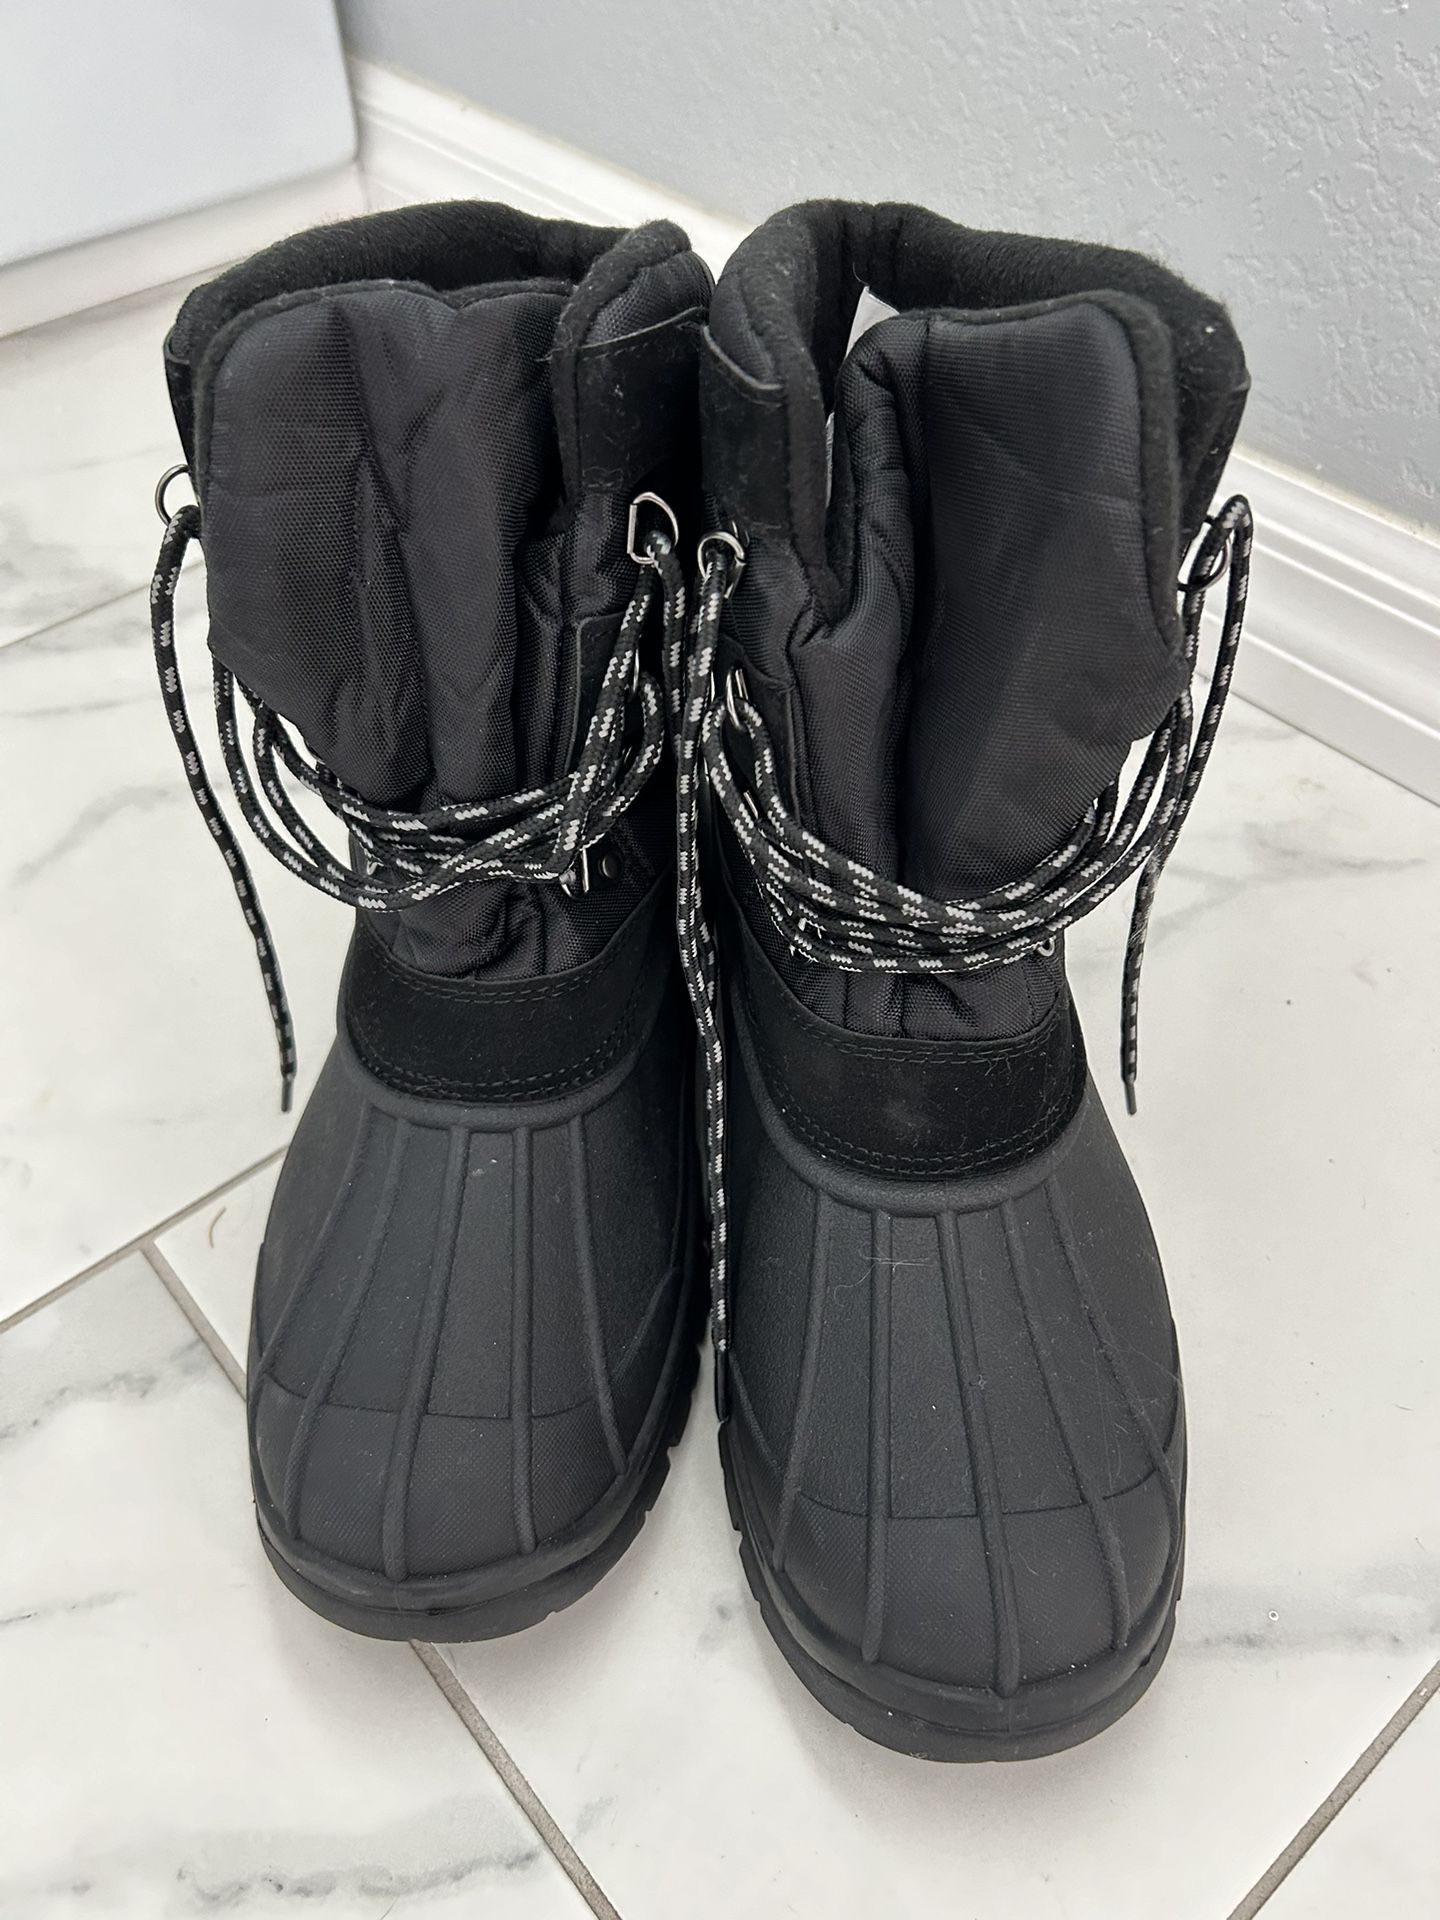 Snow boots Size 11